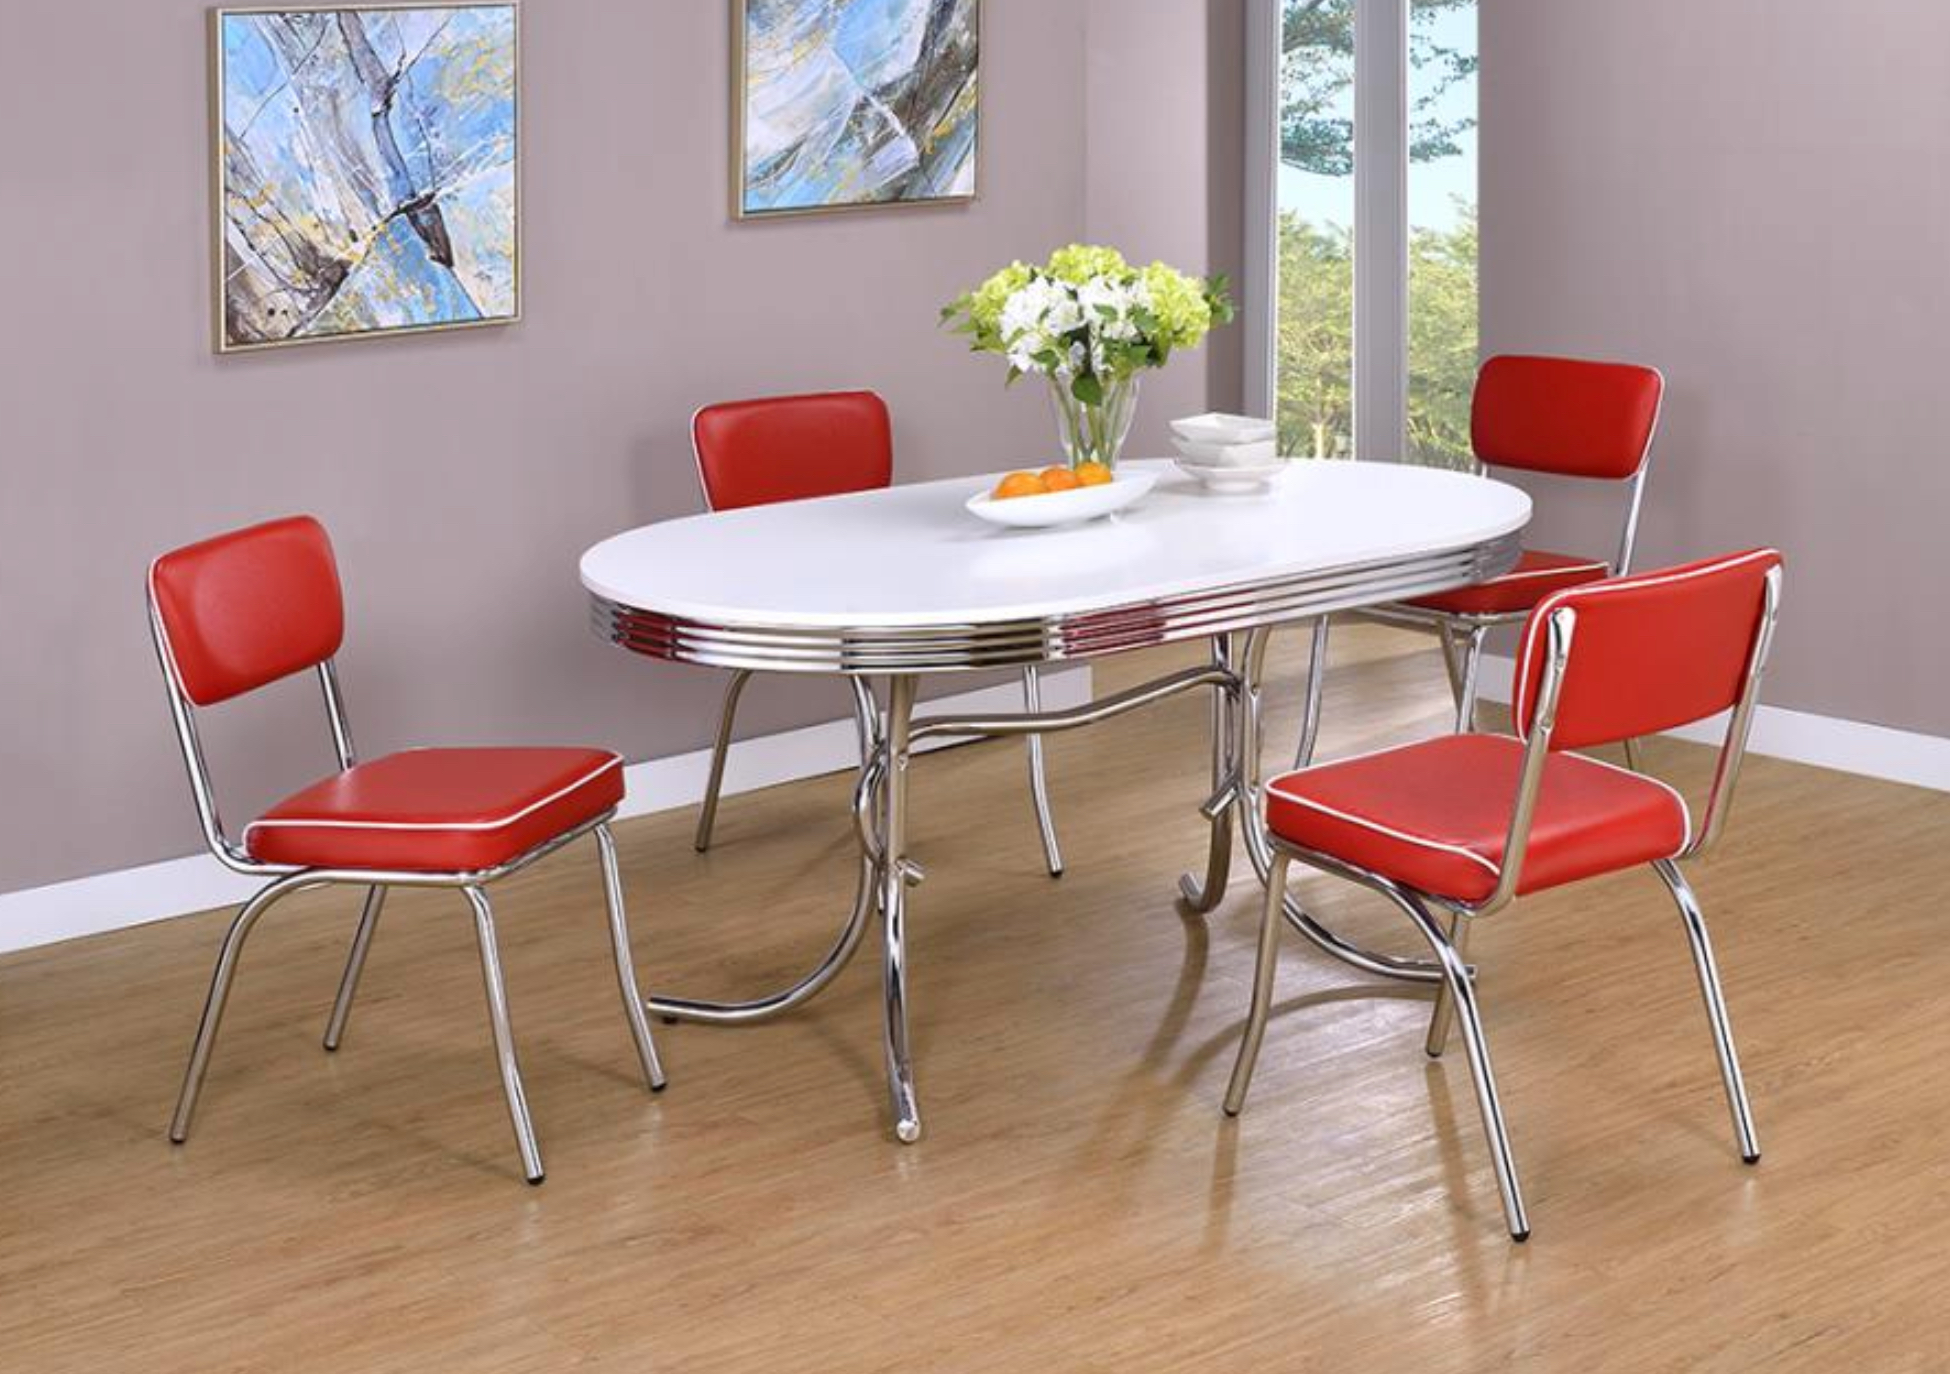 Table Set with Red Chairs